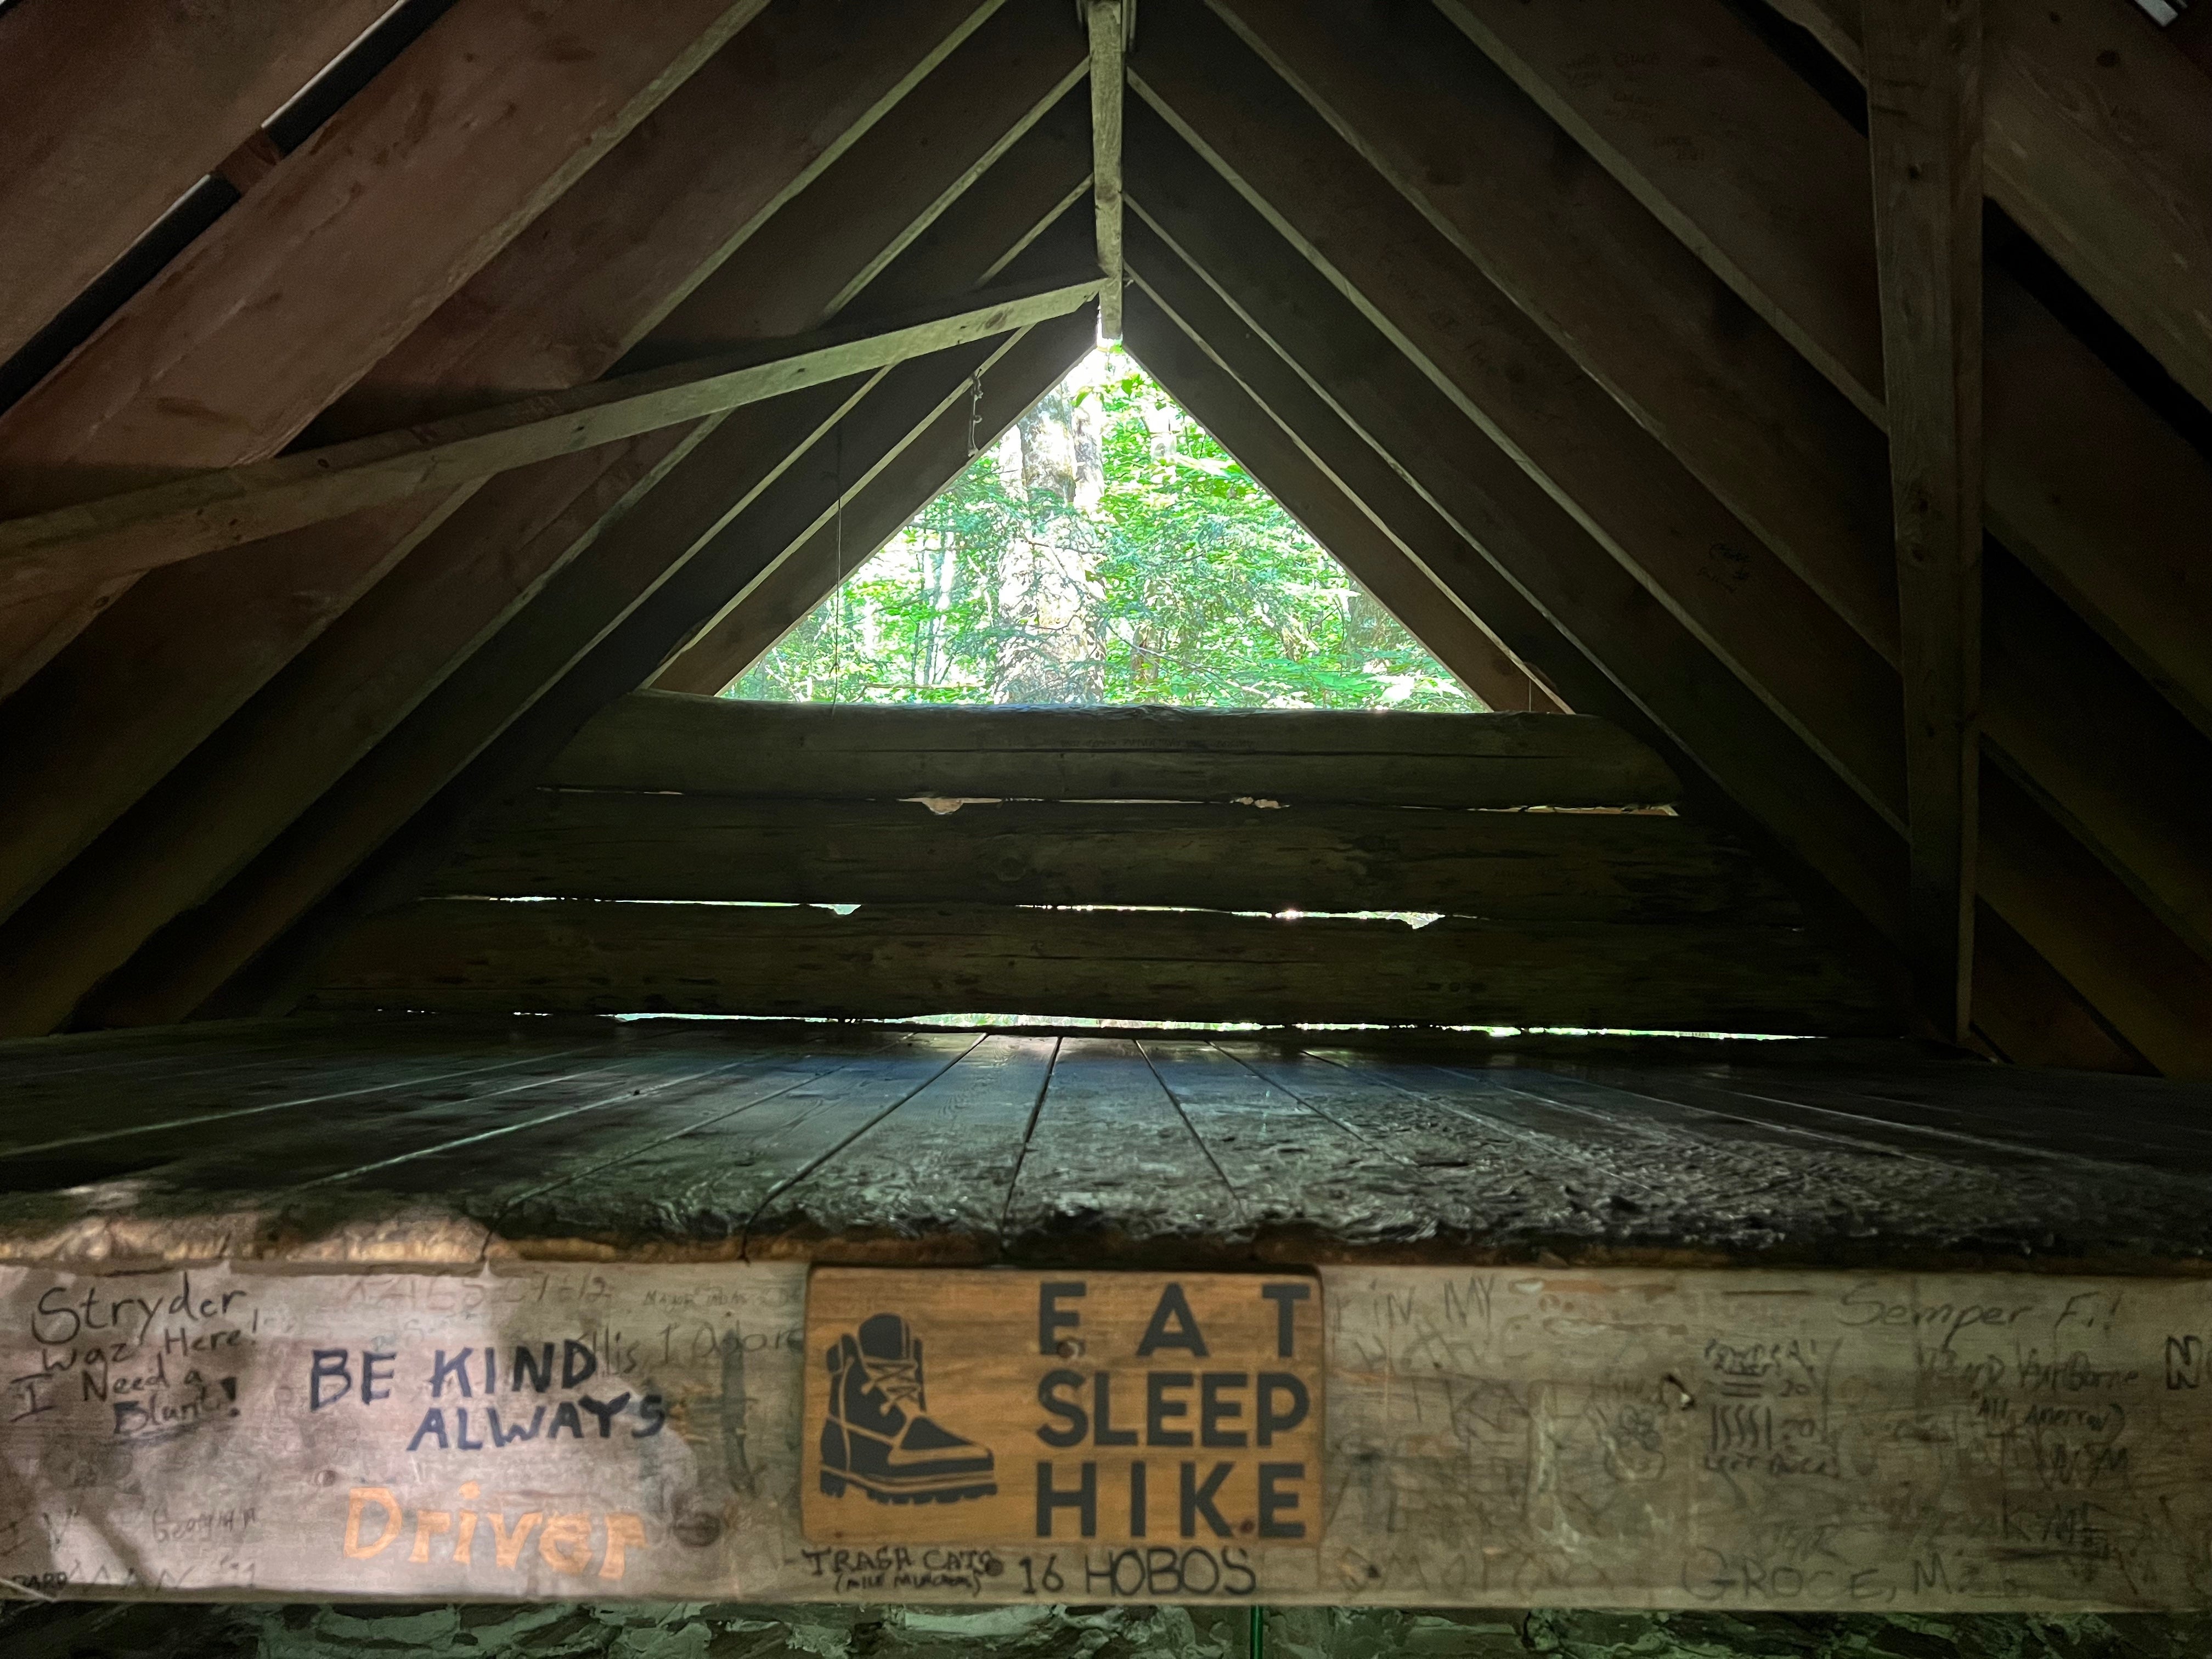 Camper submitted image from Happy Hill Backcountry Shelter on the AT in Vermont — Appalachian National Scenic Trail - 3